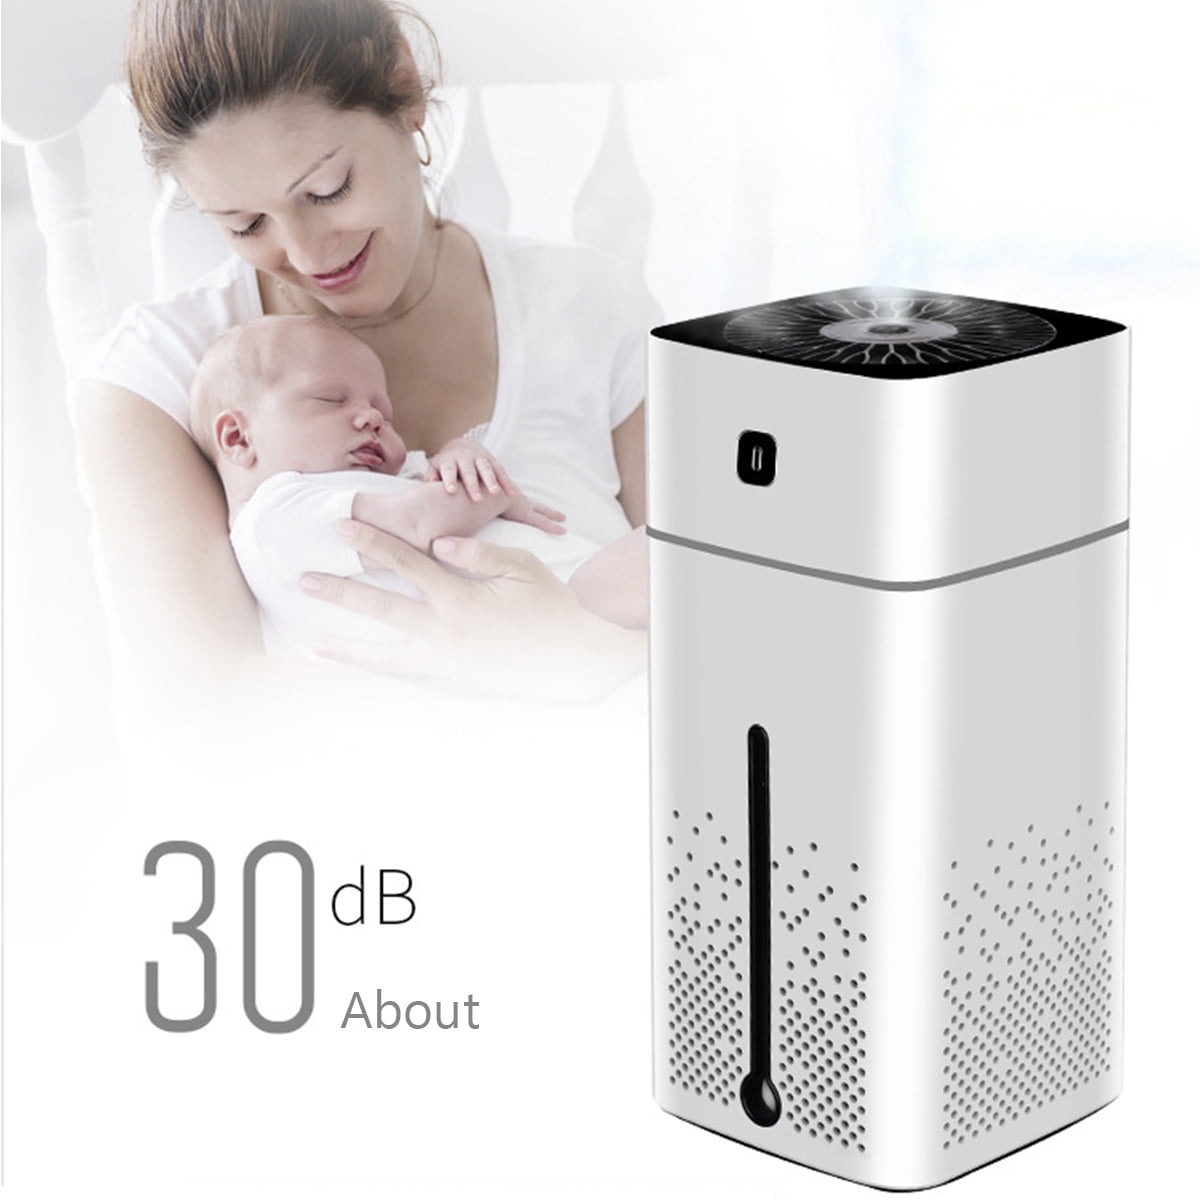 Essential Oil Diffuser New USB Rechargeable Portable Cool Mist Diffuser-air Mini Humidifiers 1000ml Air Dehumidifier Waterless Auto Shut-Off Changing for Home Office Baby,White 